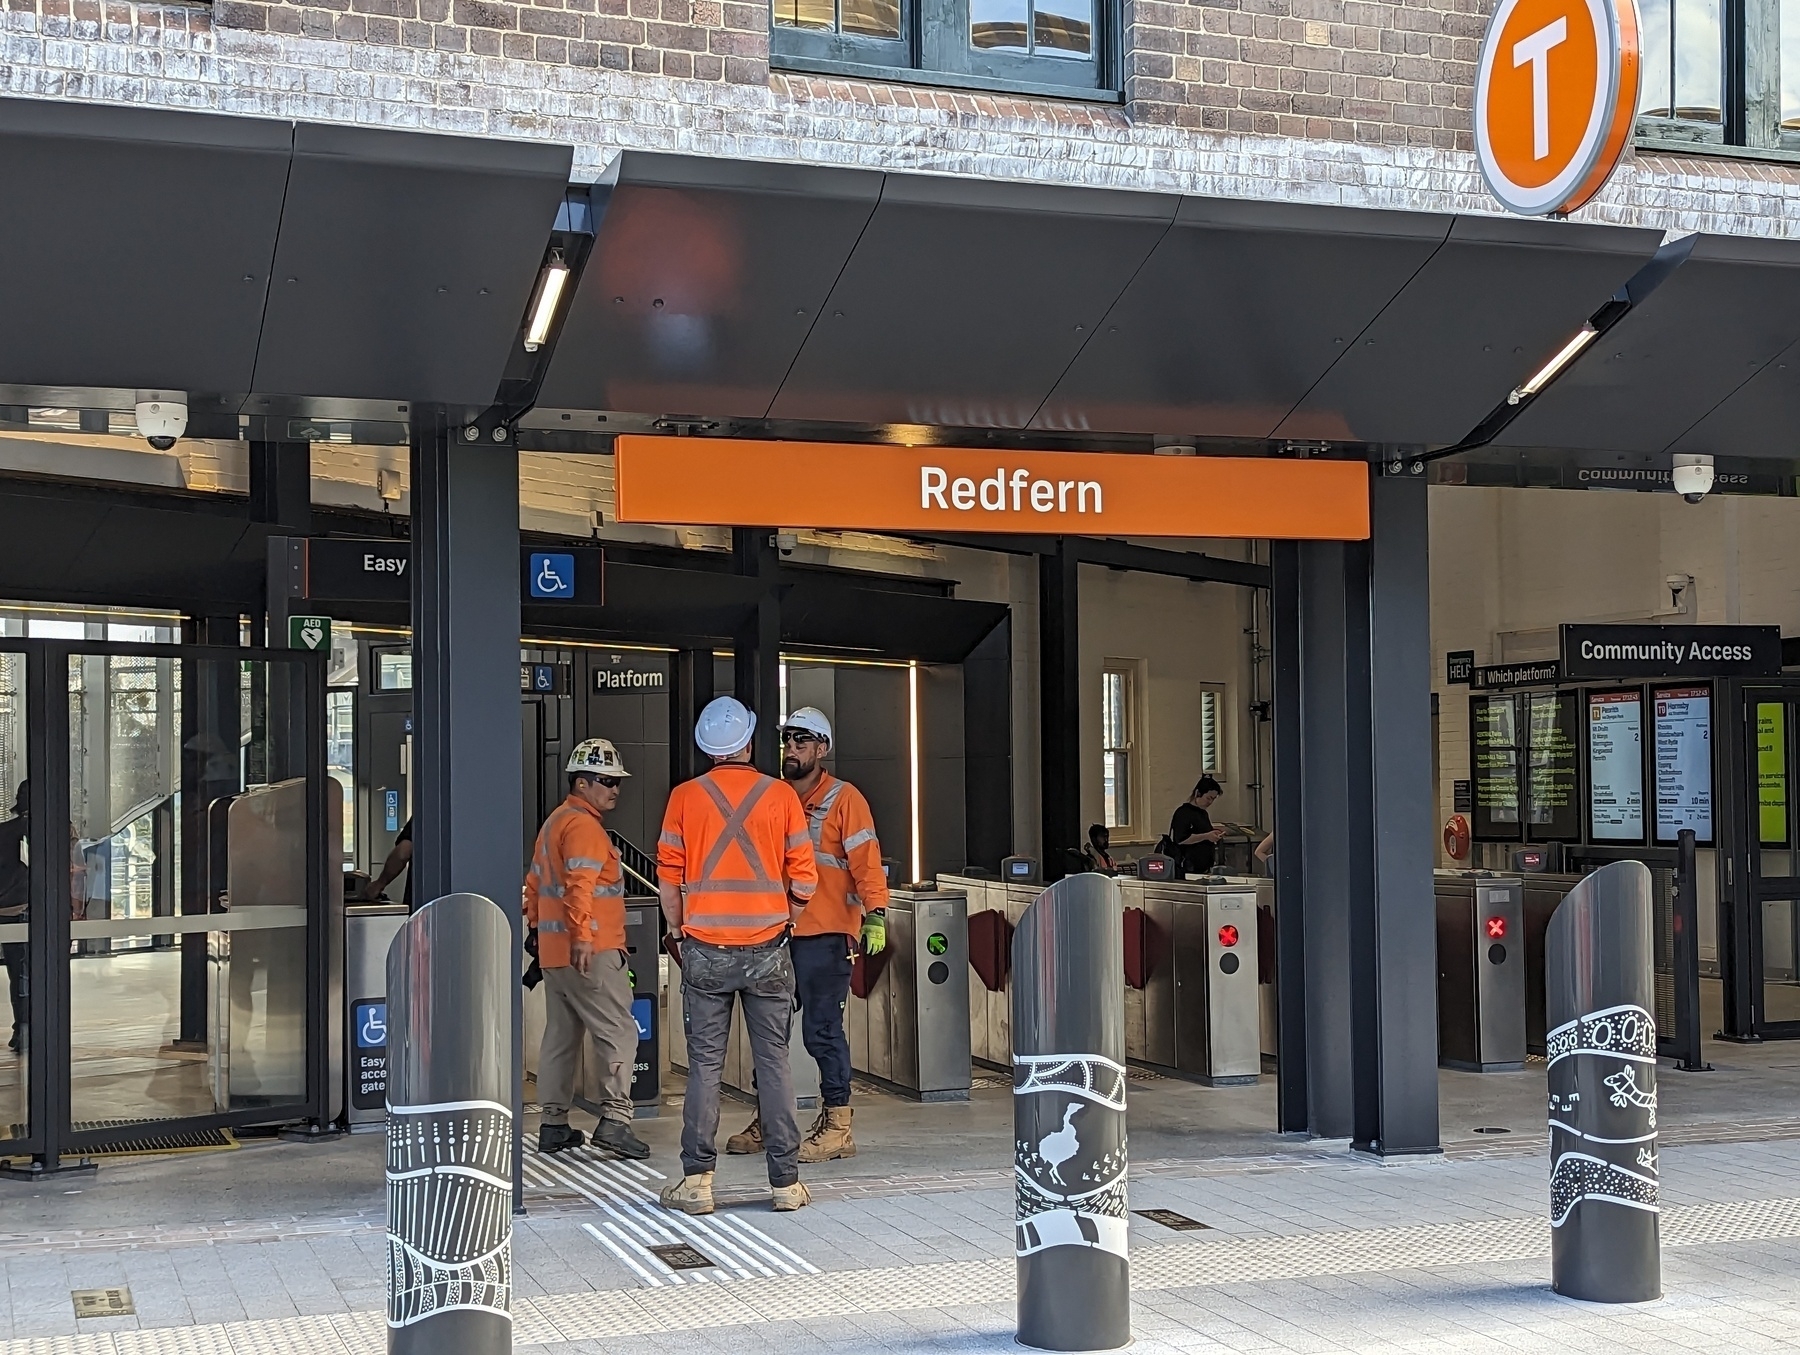 Three construction workers stand at the newly opened Southern entrance to Redfern Station in Sydney&10; Bollards in the foreground show Aboriginal art, recognising Redfern's strong Indigenous culture, politics and heritage.